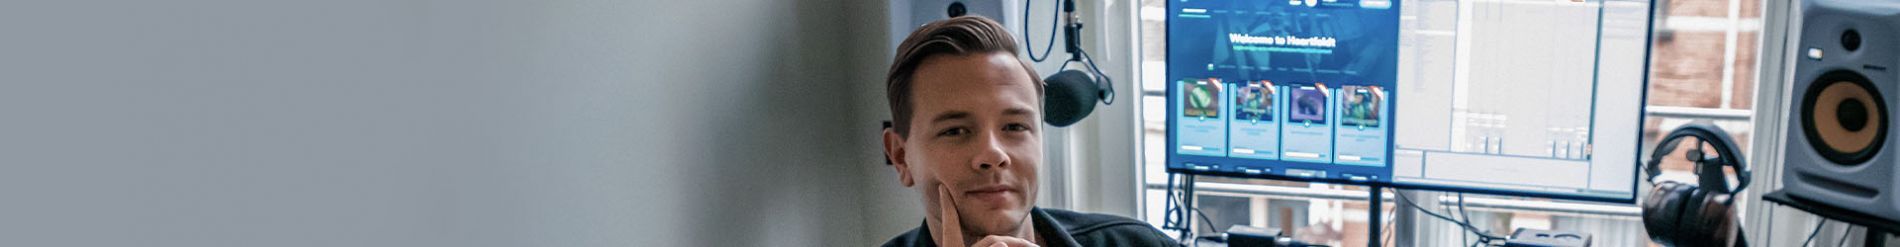 Win A Two-Year-Subscription to Fangage & a 30min Skype Call With Sam Feldt!